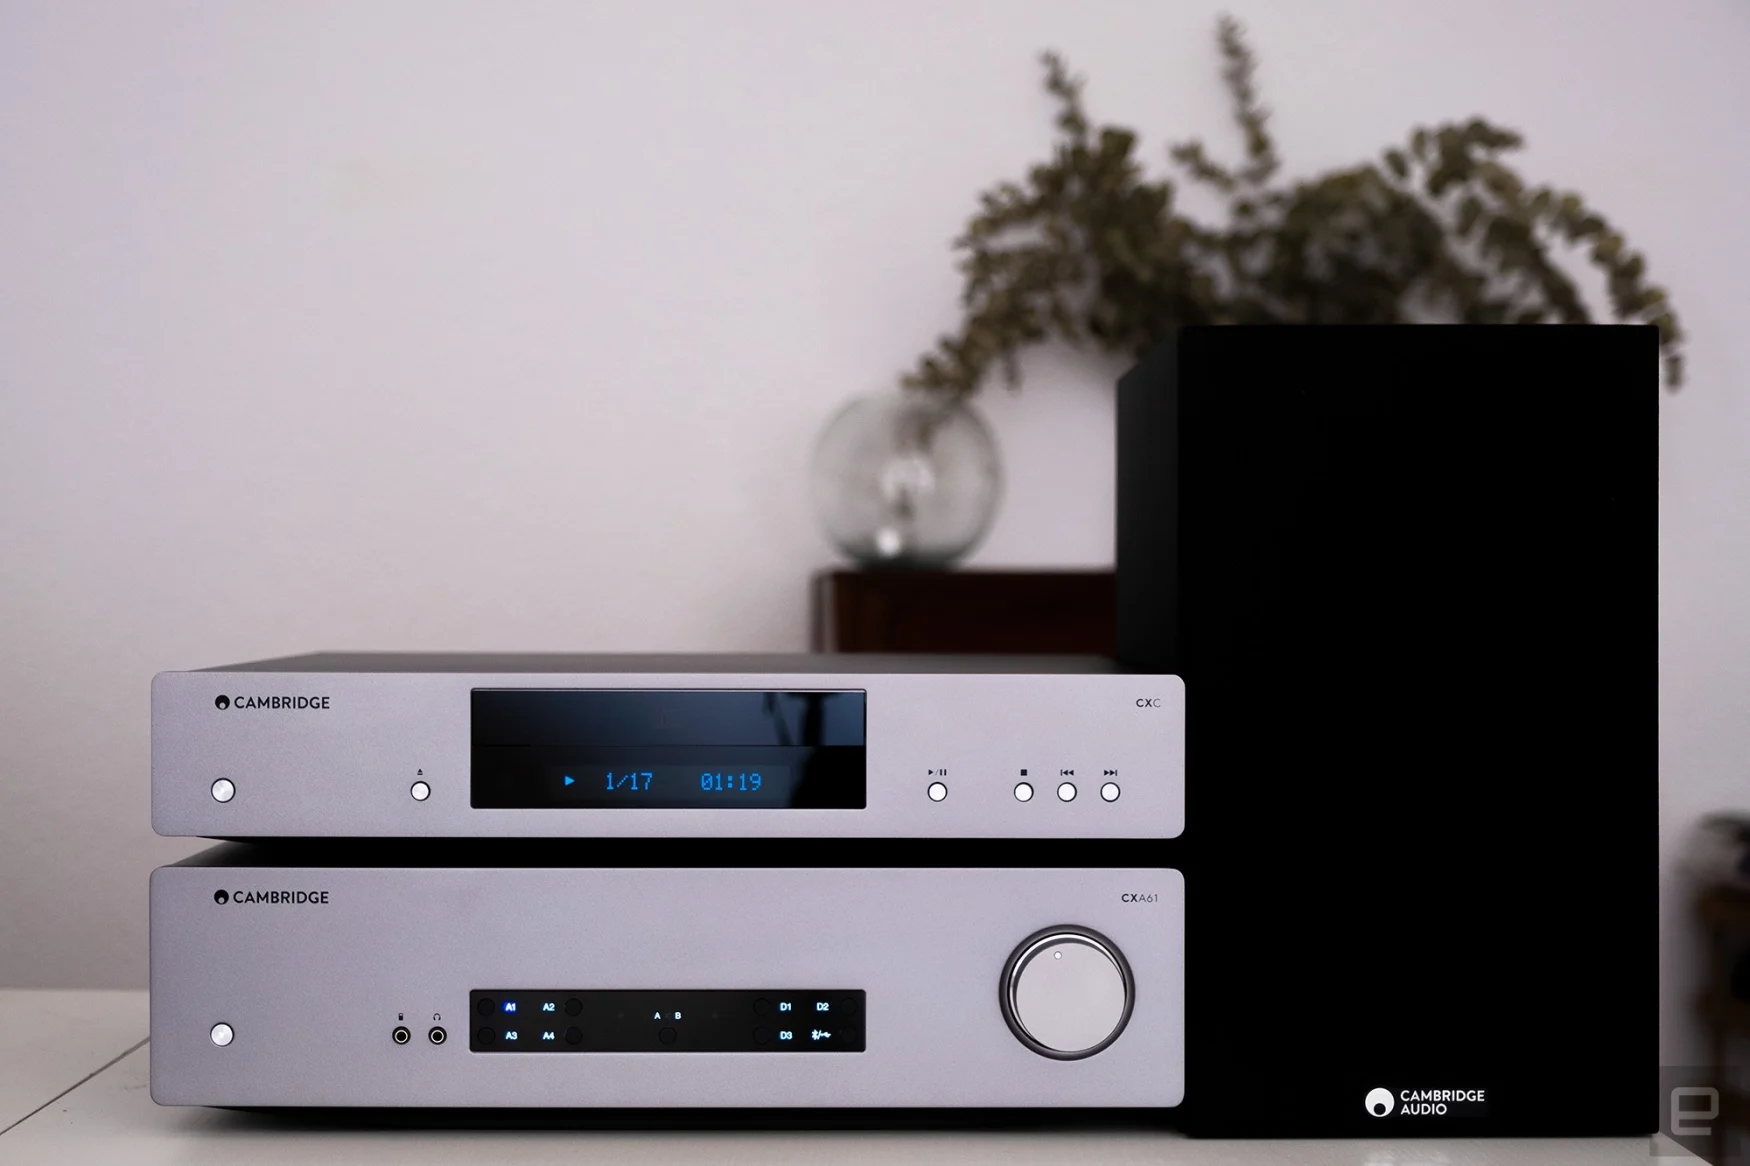 A HiFi separates amp and CD player are pictured next to a speaker.